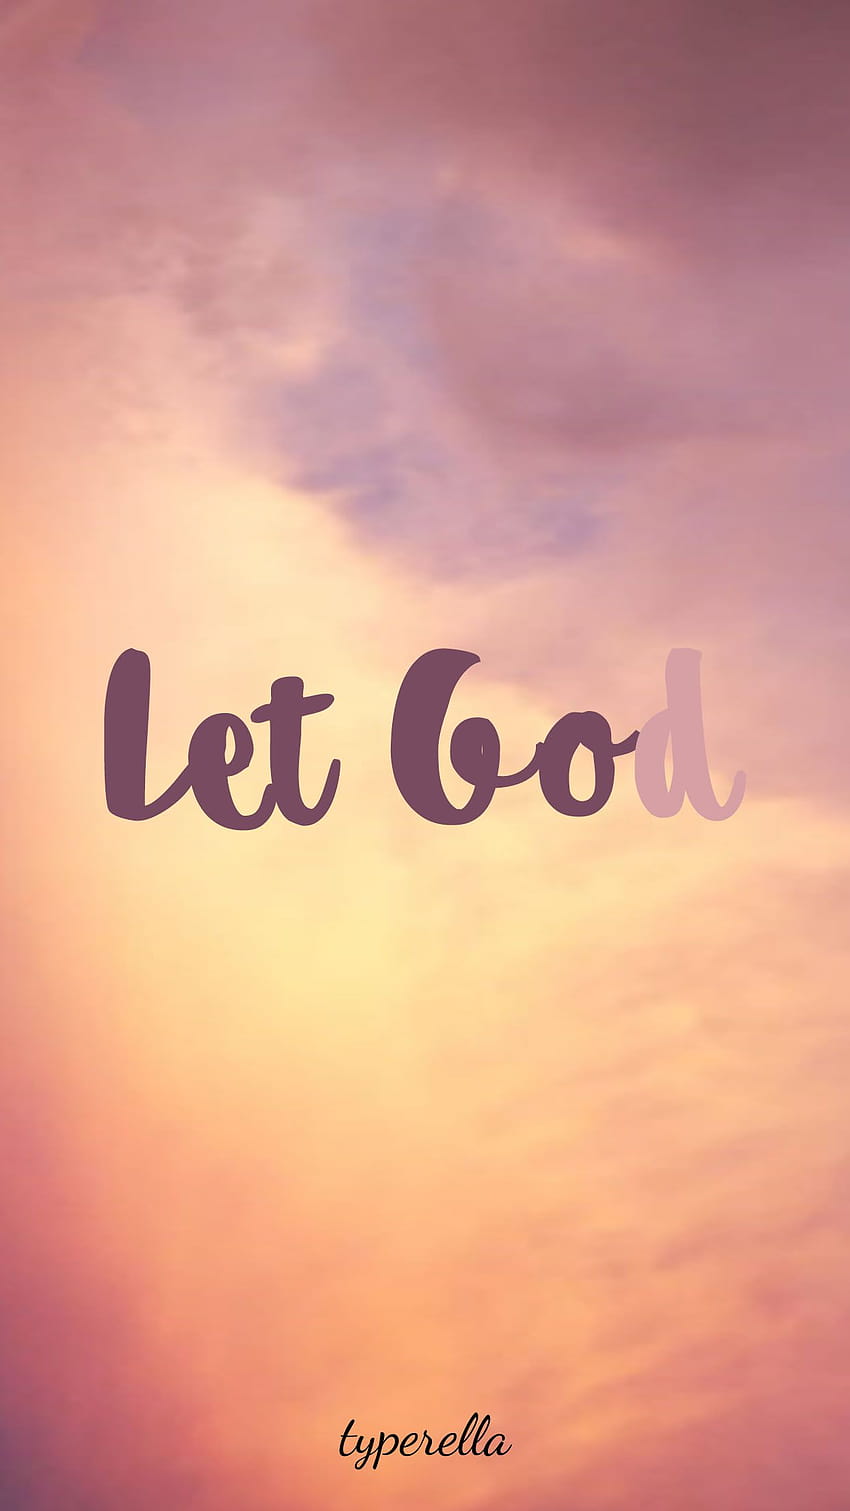 Let Go and Let God, Trust Him with all your heart., in god i trust iphone HD phone wallpaper